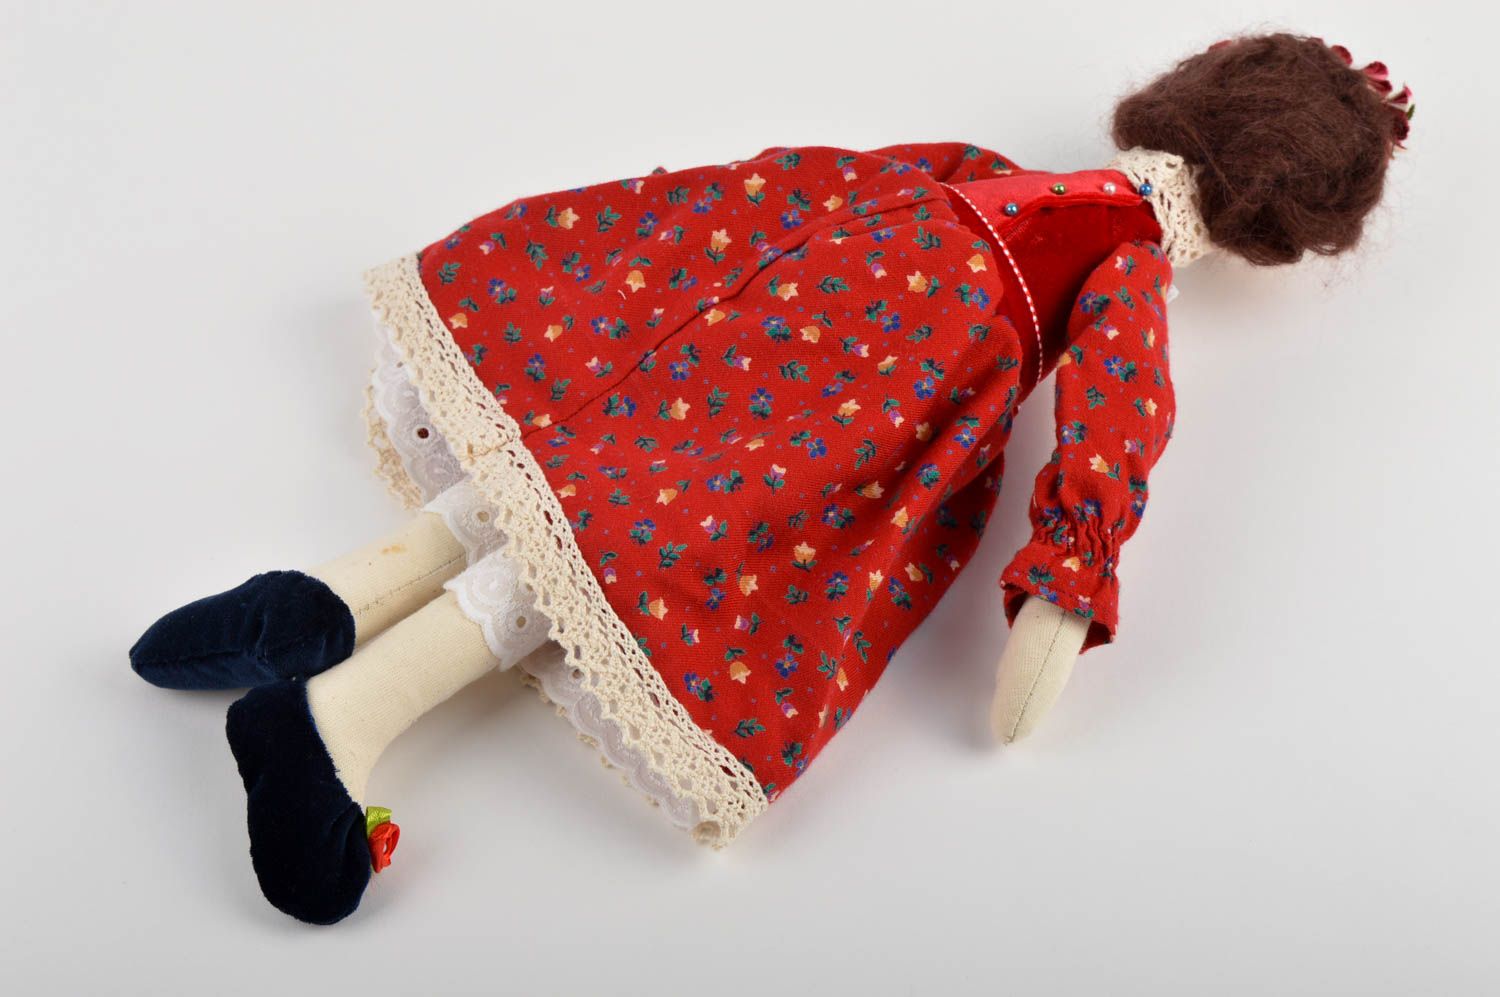 Handmade doll in red dress stuffed toy designer childrens toy decoration ideas photo 3